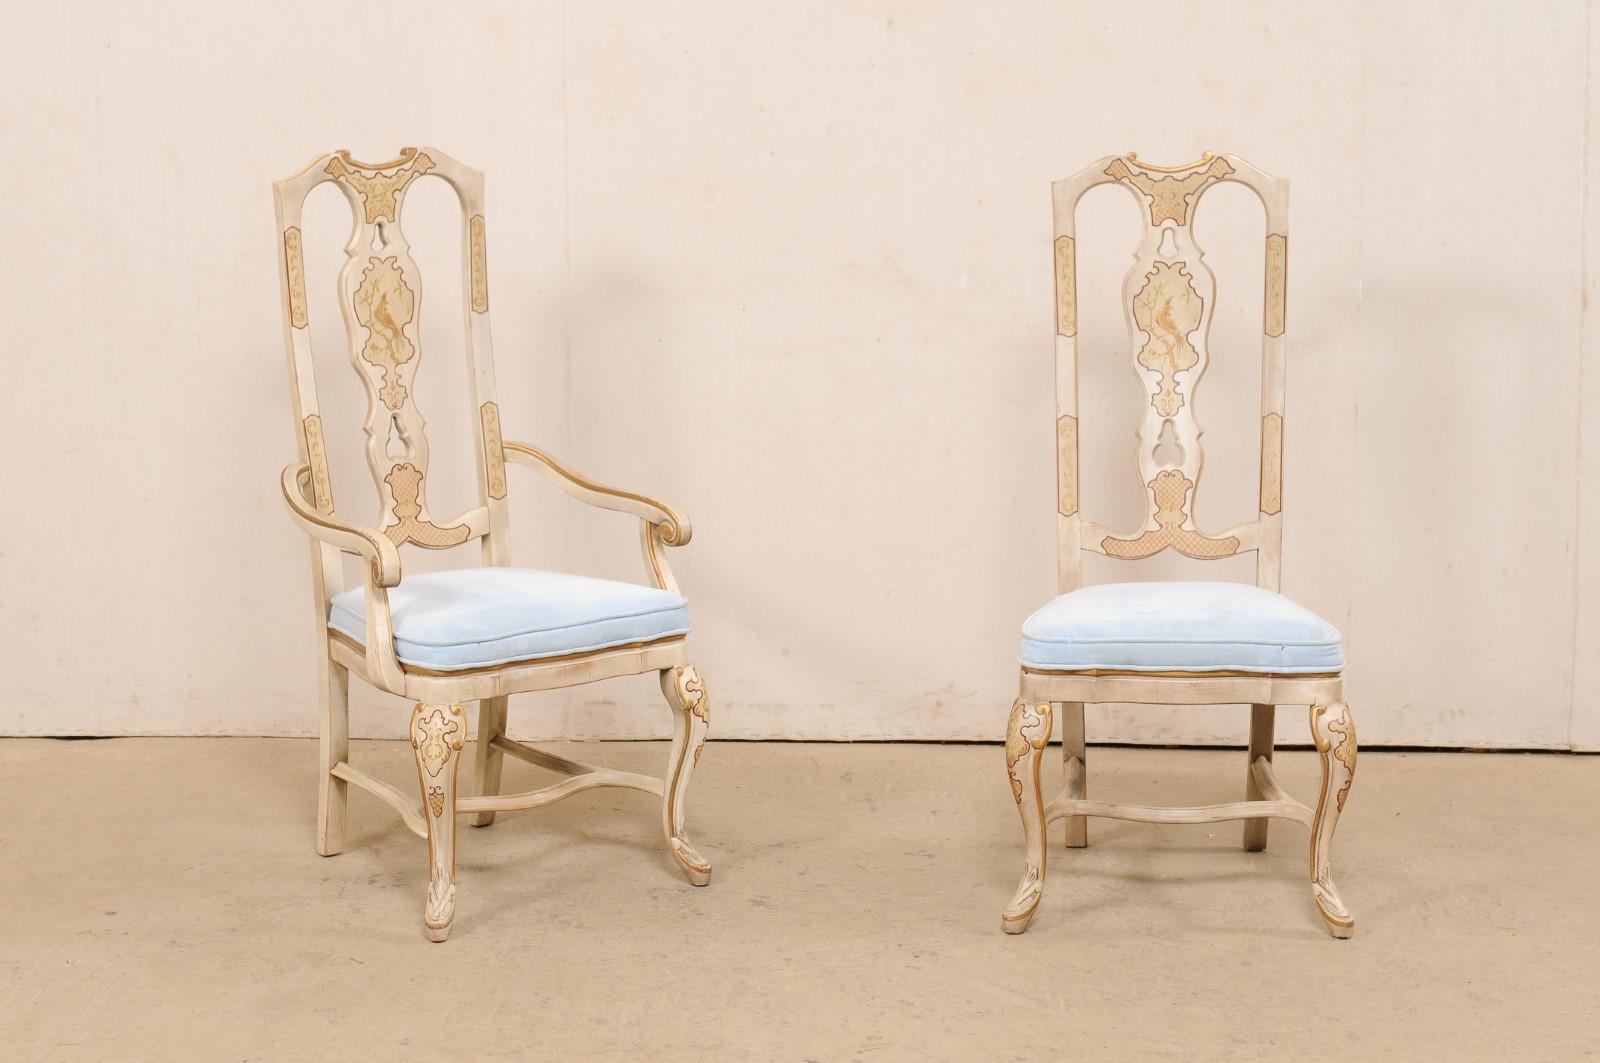 An English set of six dining chairs, with soft colors and chinoiserie style painted influences. This vintage set of chairs, comprised of a pair of armchairs and four side chairs, have tall and a nicely carved pierced splats, upholstered seats, and